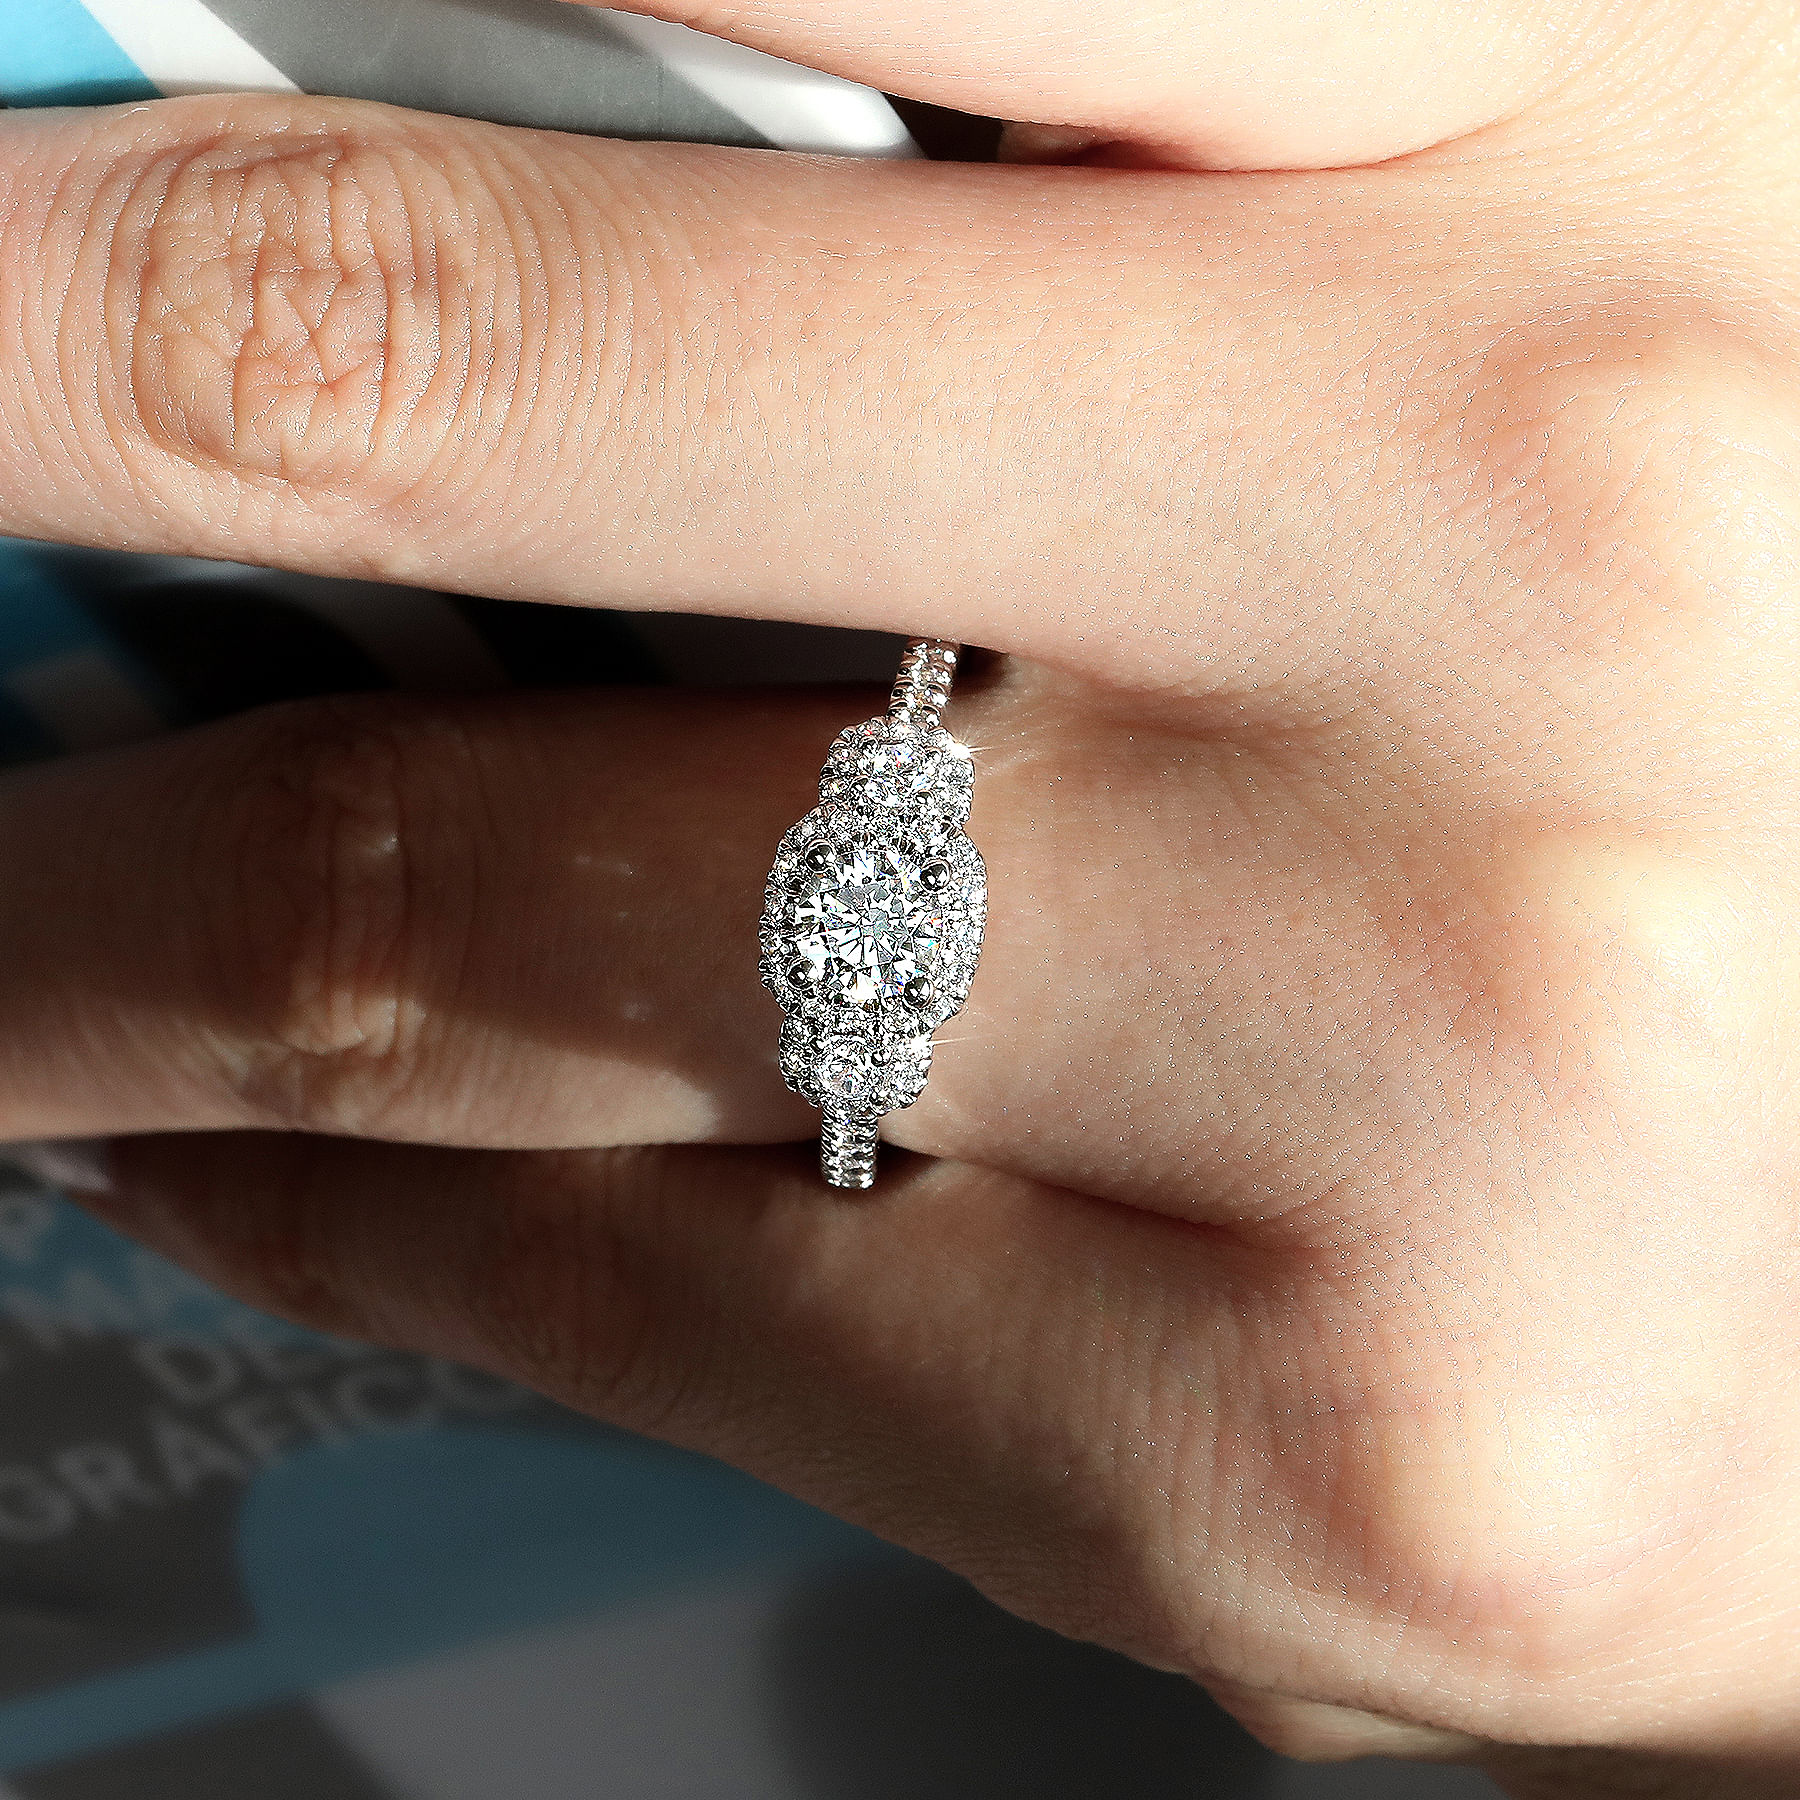 14K White Gold Round Complete Diamond Engagement Ring